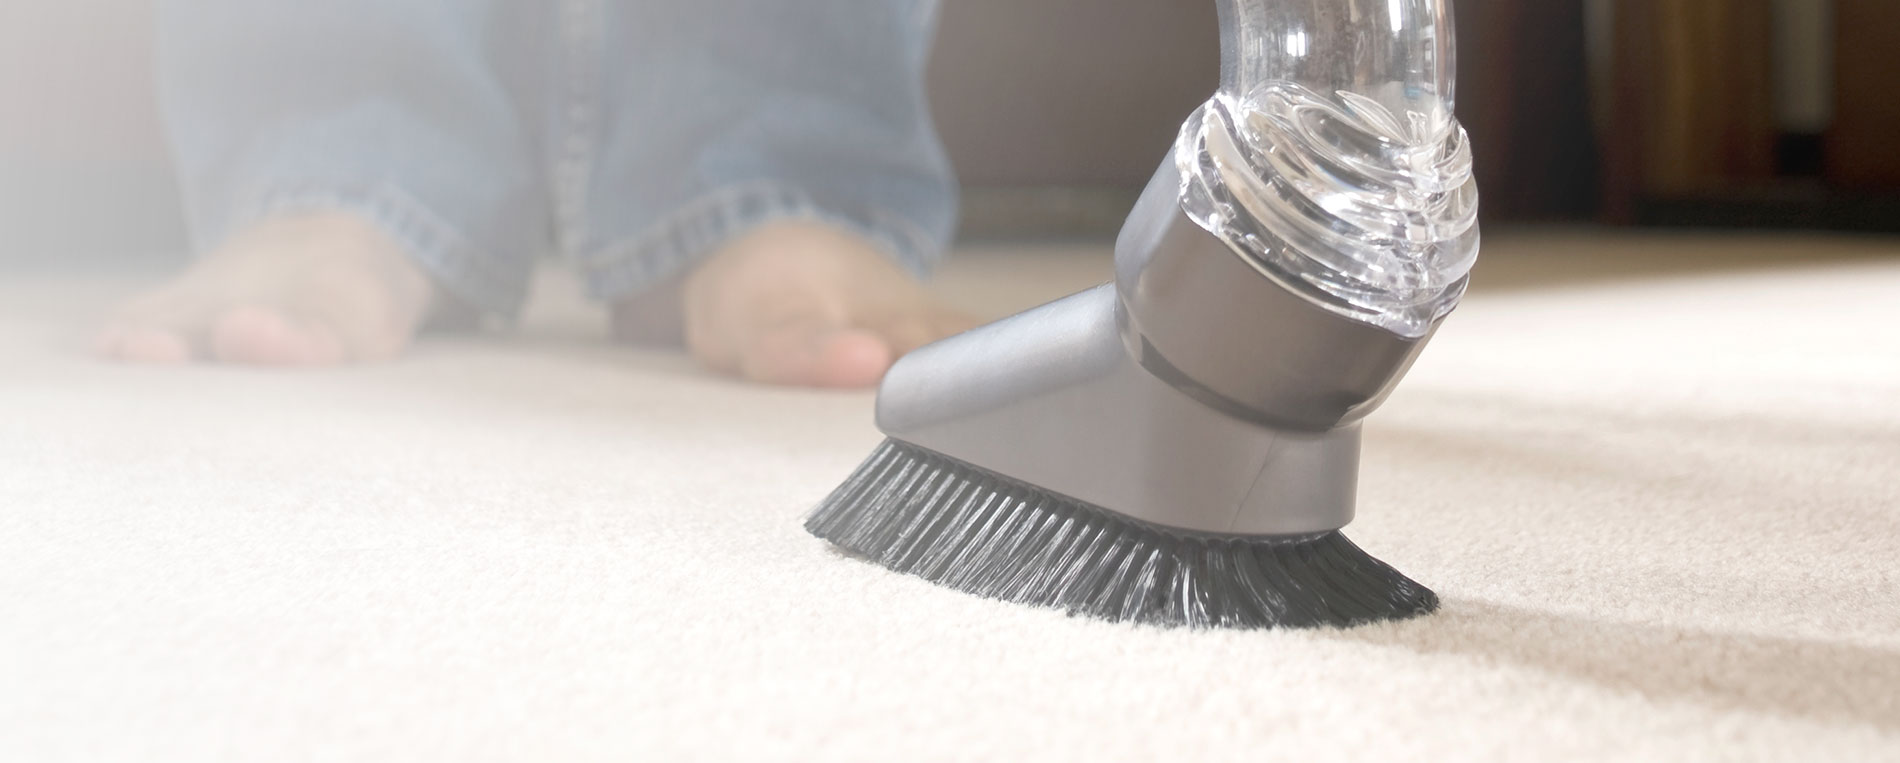 Thorough House Cleaning Services In Garden Grove